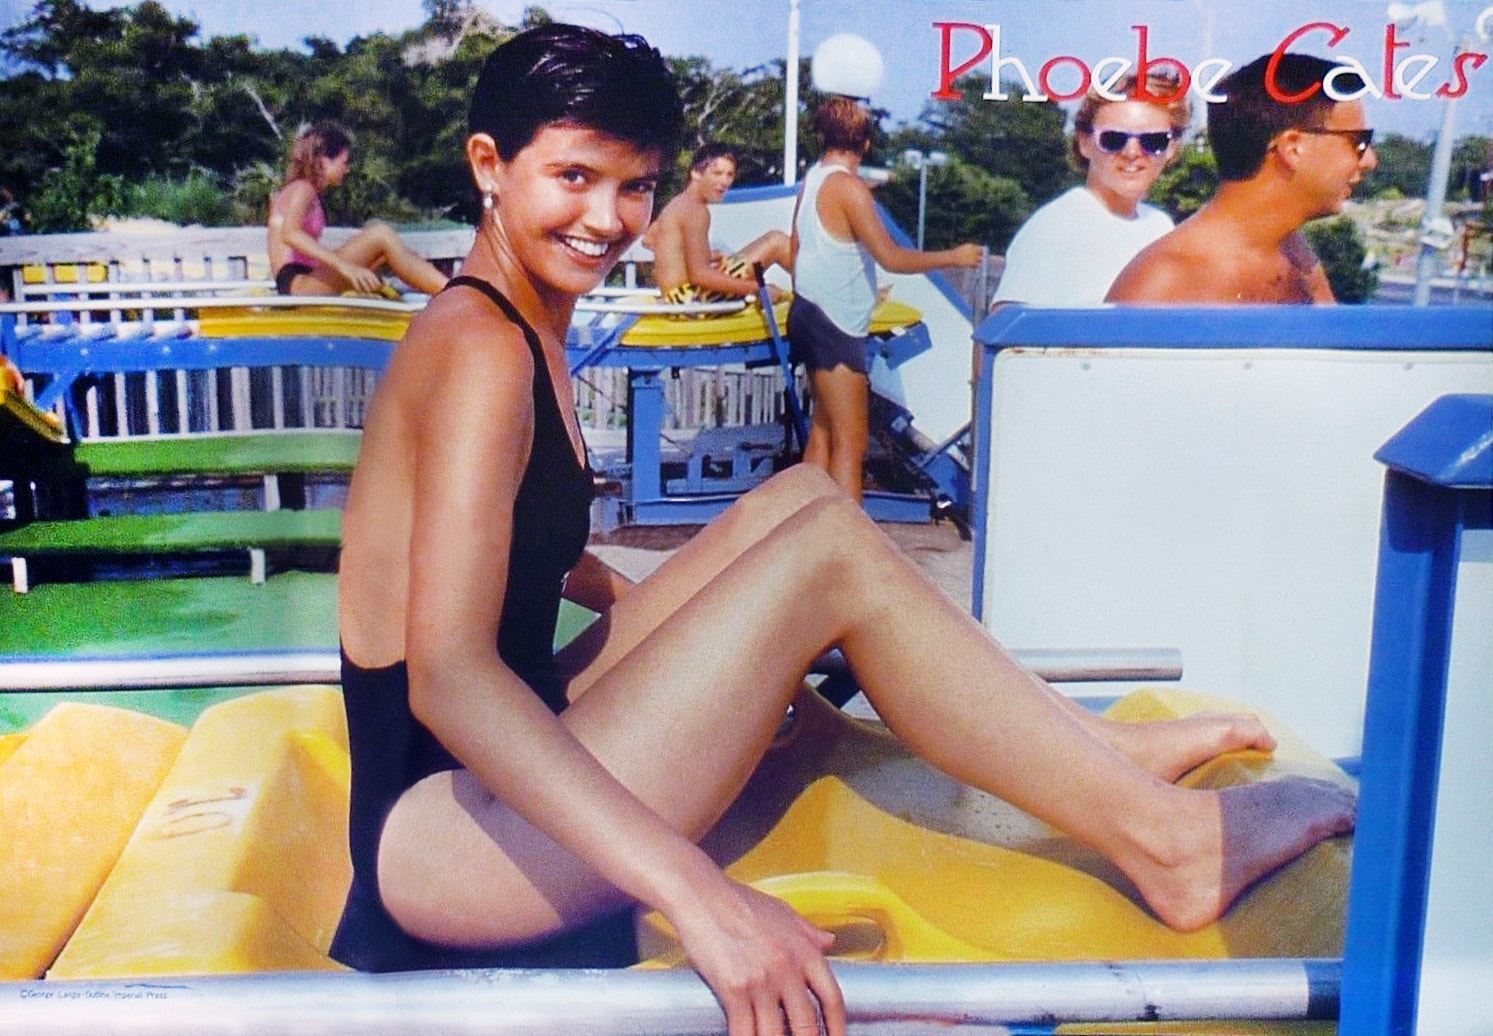 Phoebe Cates thighs awesome